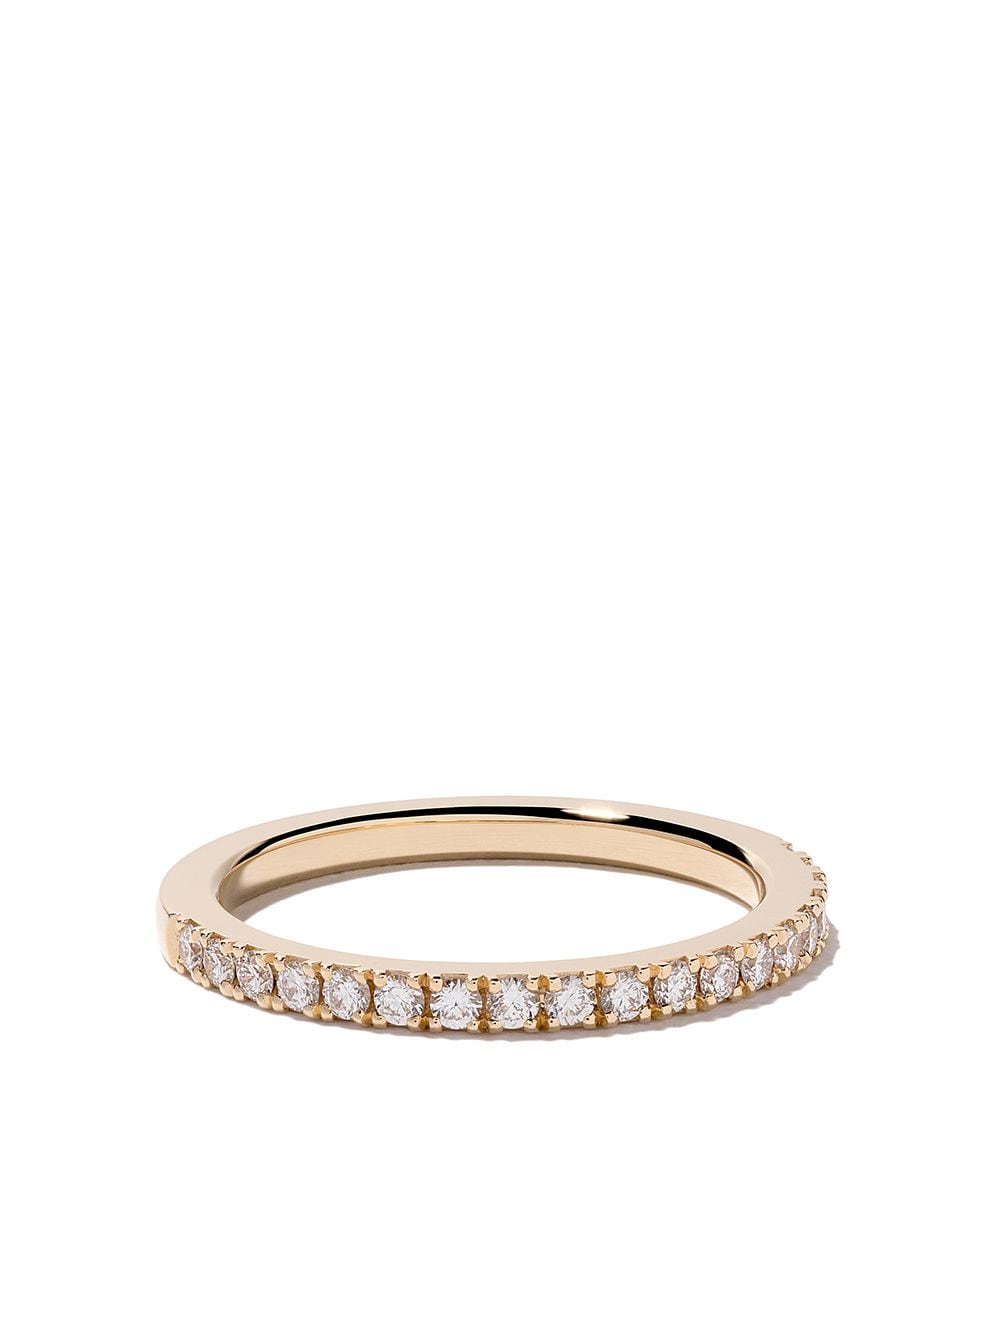 Image 1 of De Beers Jewellers 18kt yellow gold DB Classic half pavé diamond band